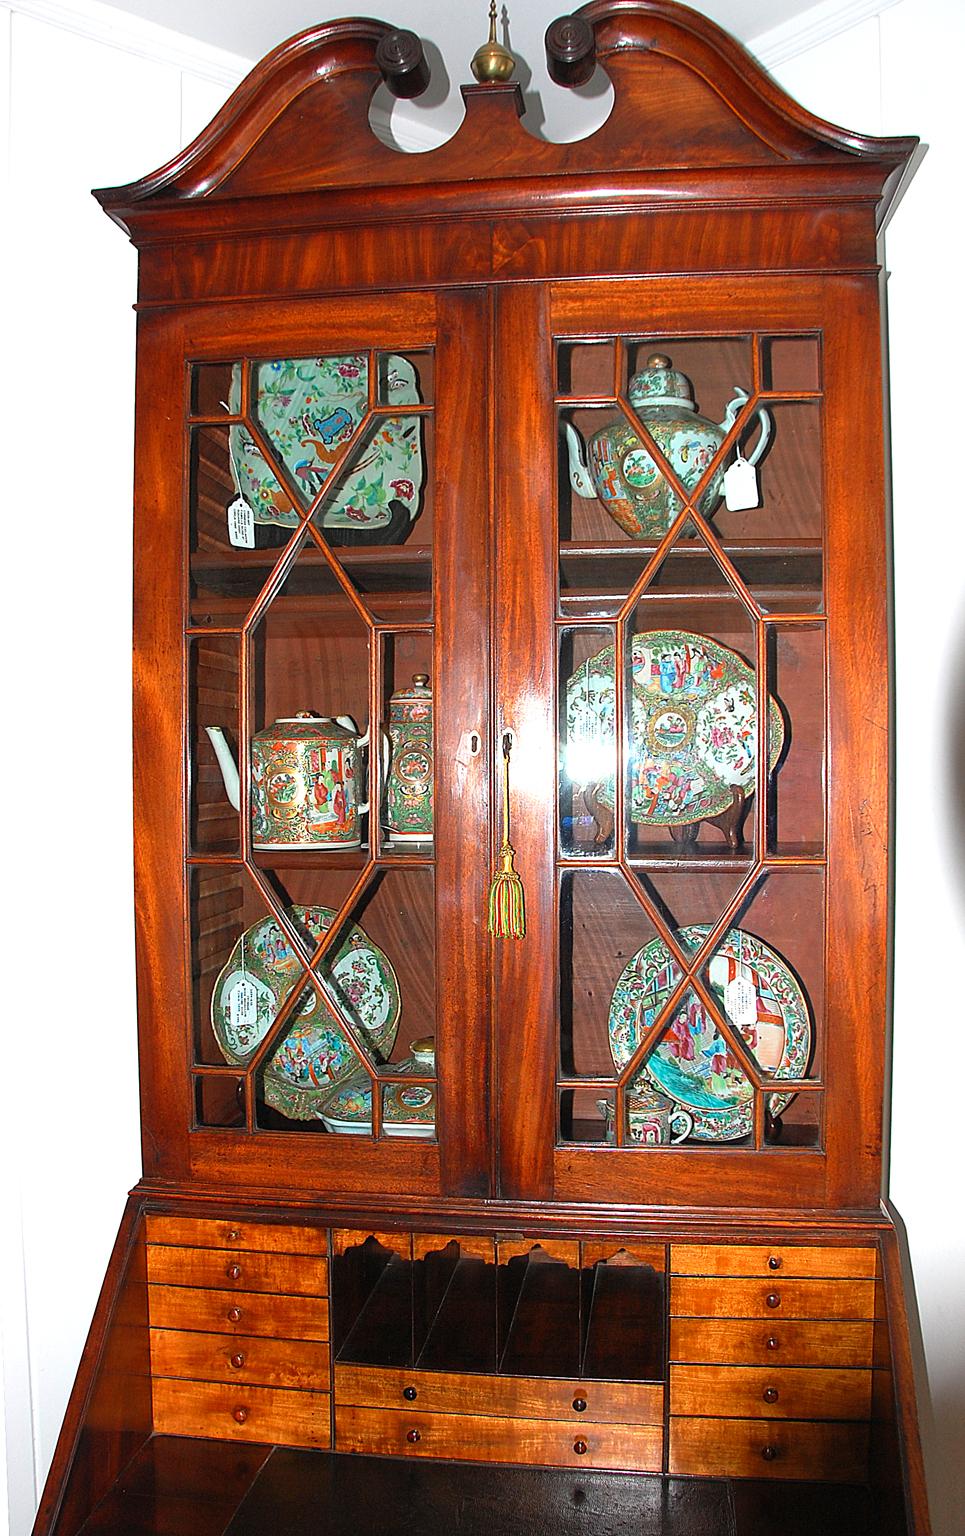 English Georgian period mahogany bureau bookcase with swans neck pediment above astragal glazed doors enclosing three adjustable shelves. The bureau bookcase is constructed in two parts, the bottom half being a fall front desk with four graduated